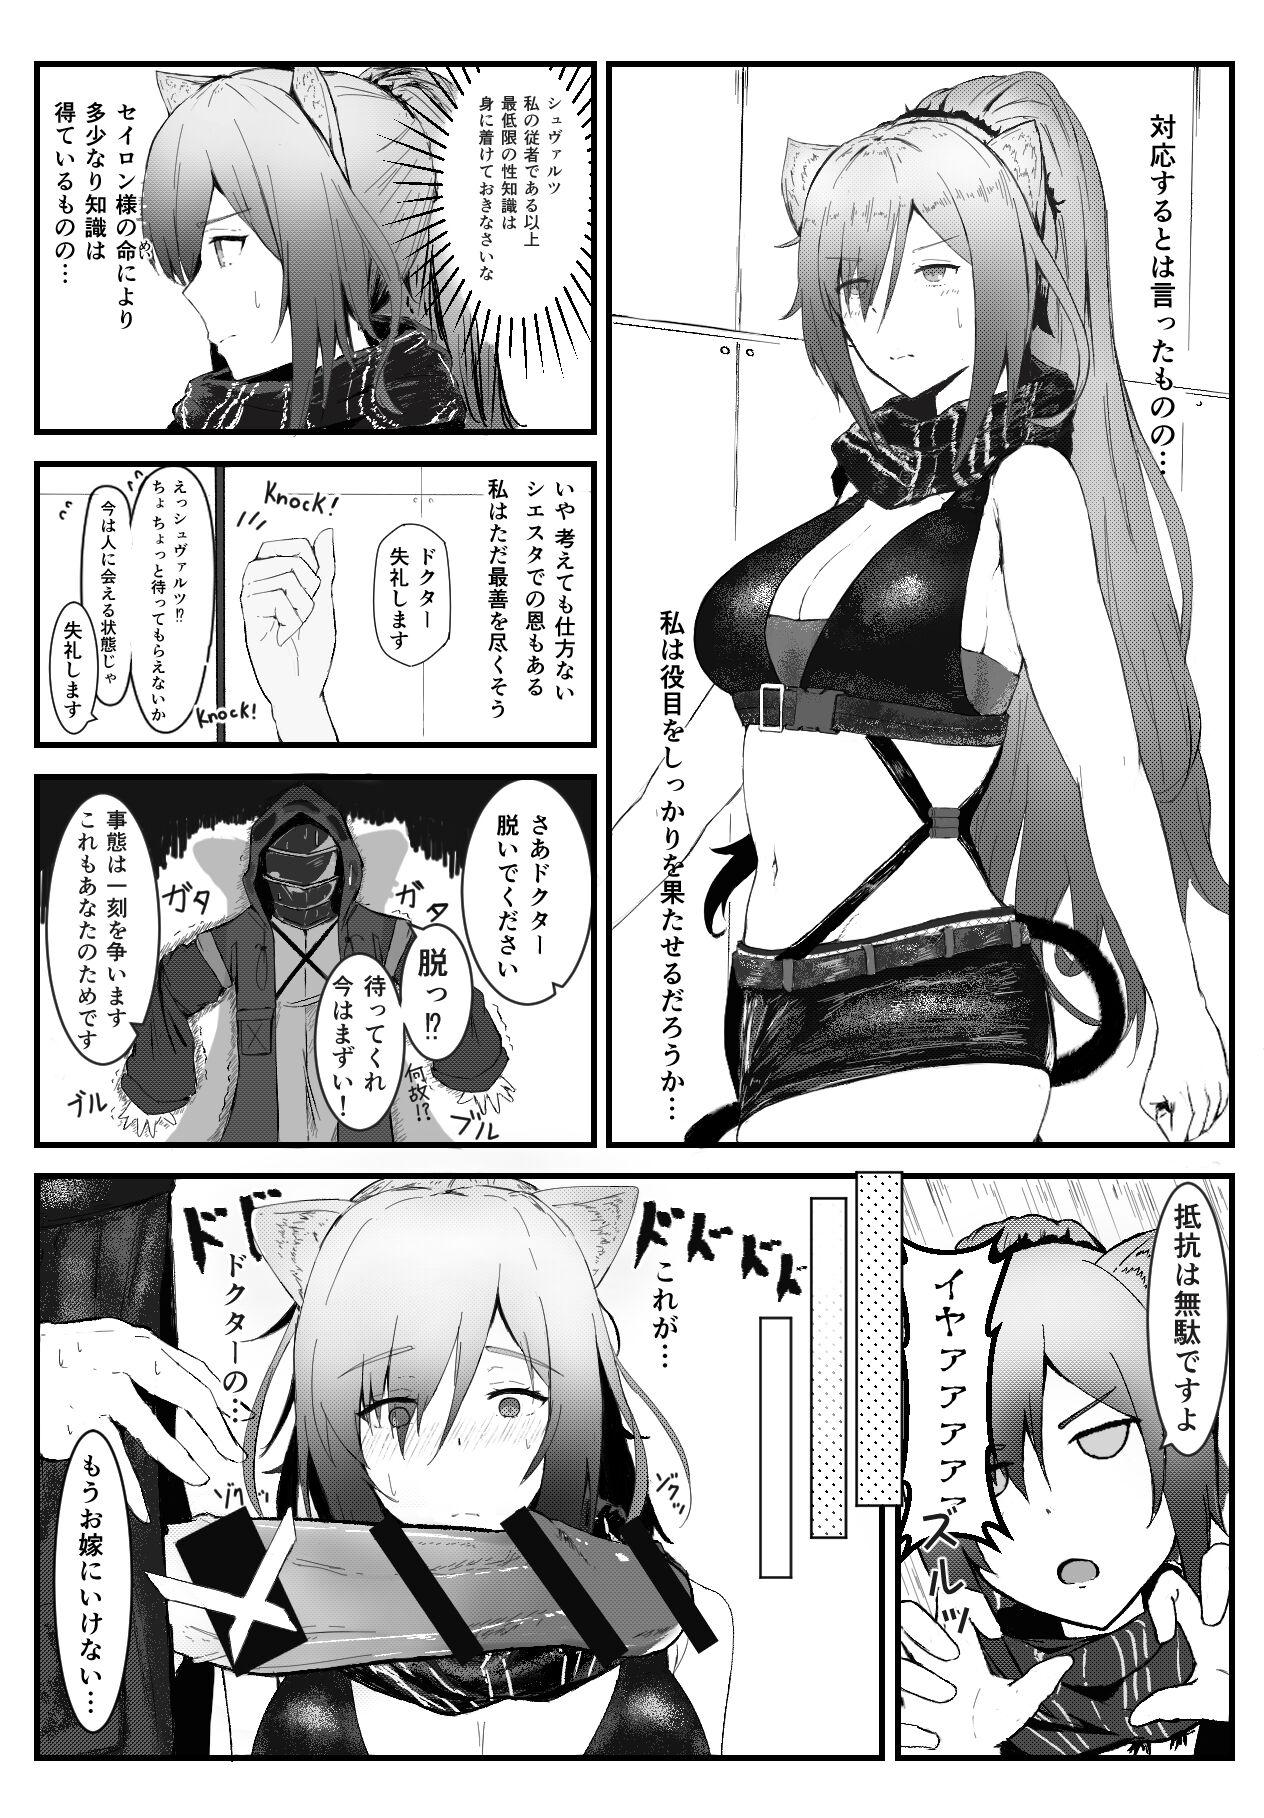 Tiny Titties arknights short story - Arknights Ass Fucking - Page 2